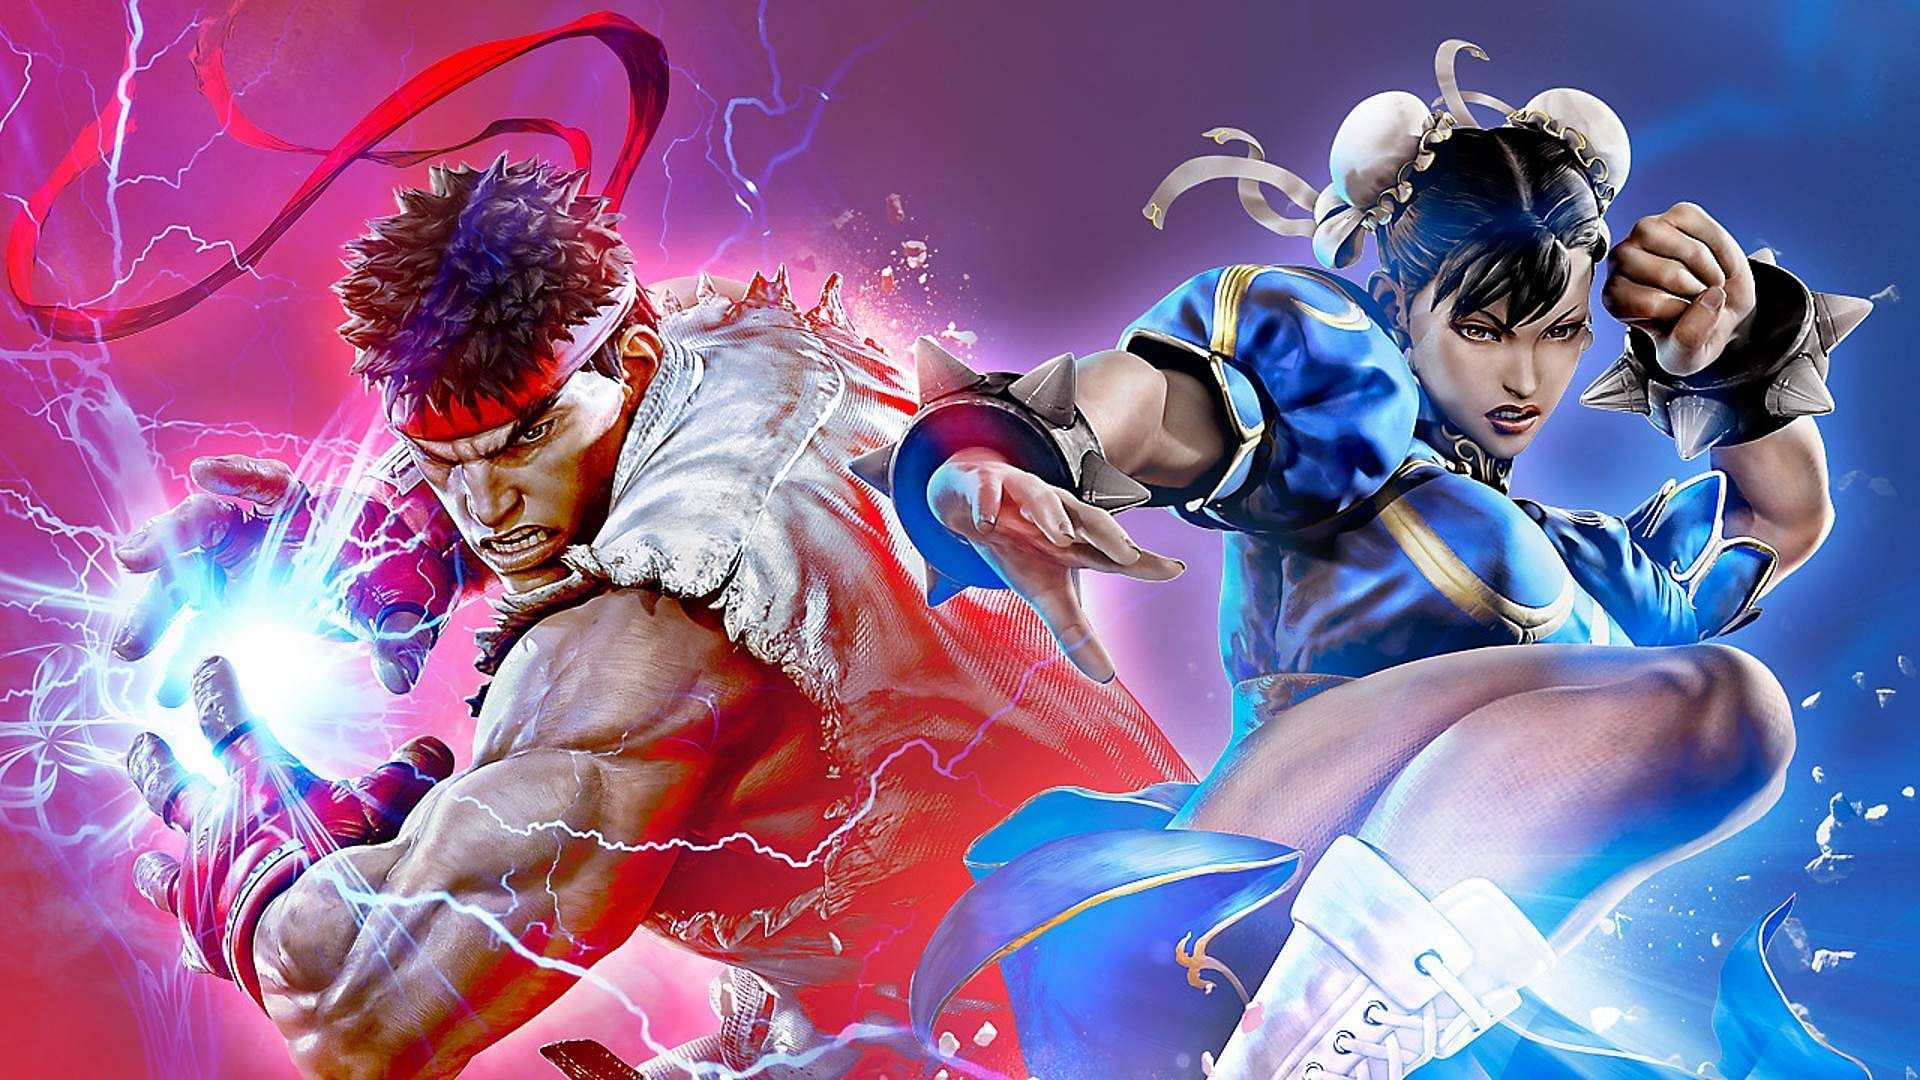 Players will be able to earn 44 different trophies in Street Fighter 6 (Image via Capcom)